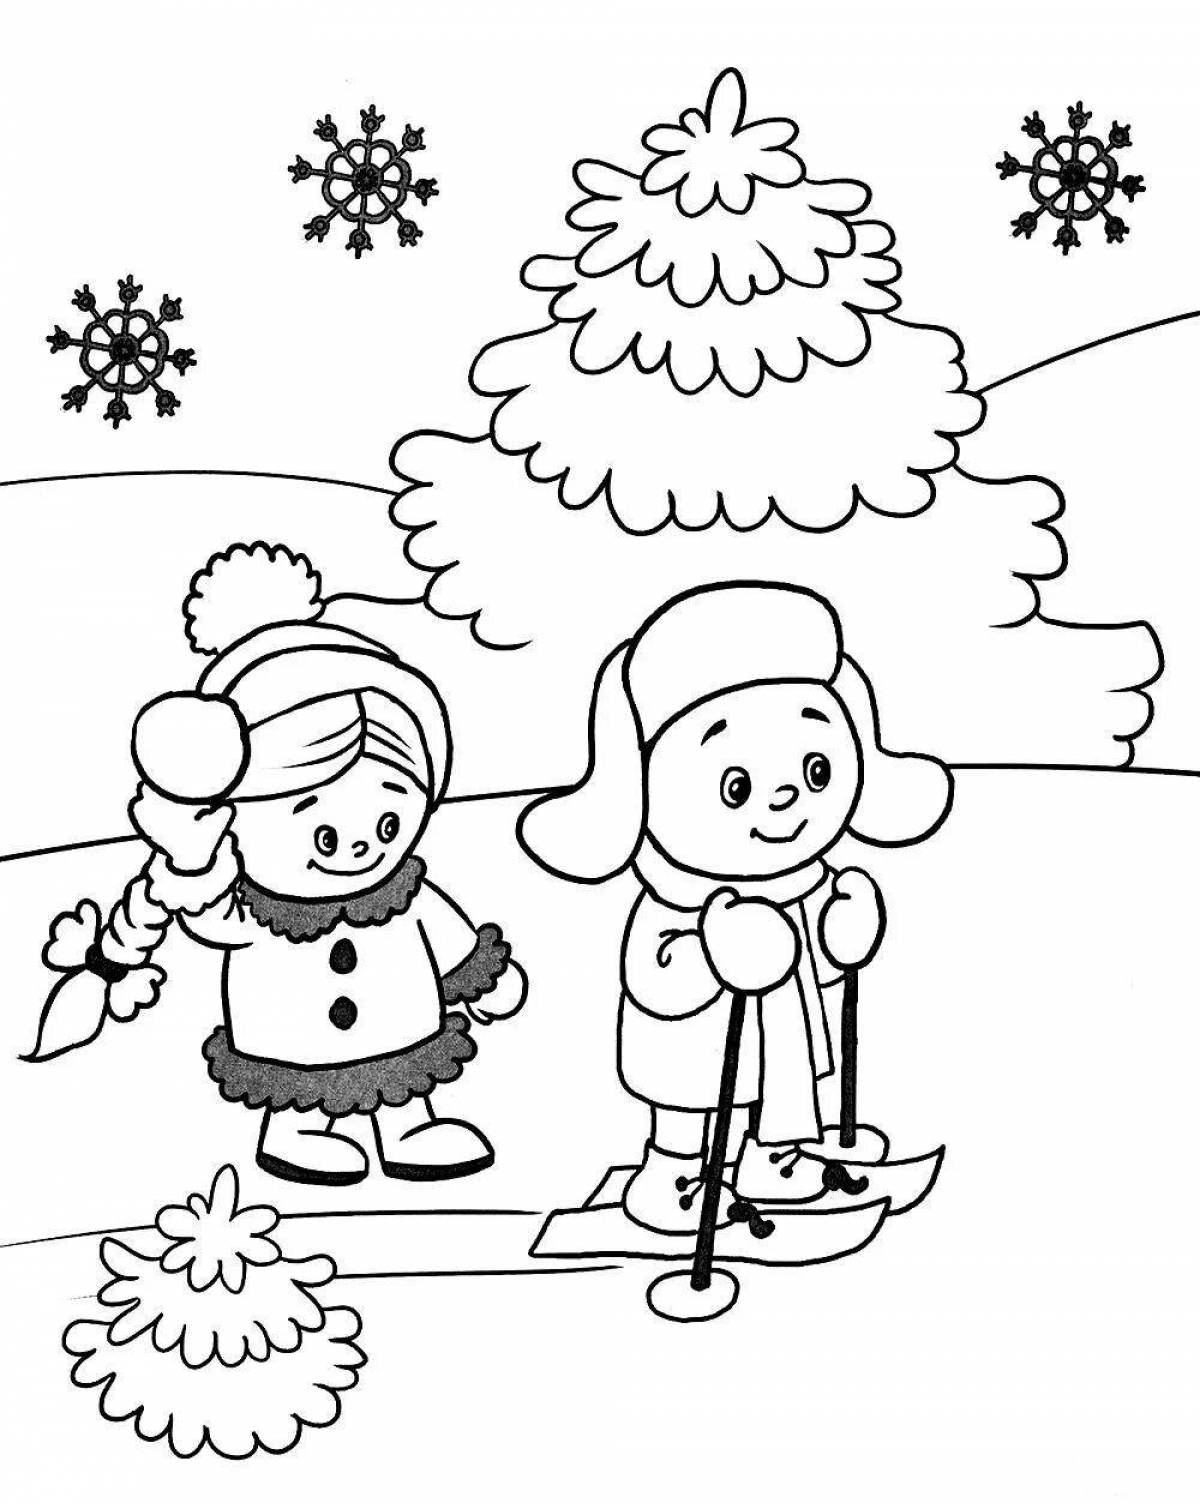 Great winter coloring book for 6-7 year olds